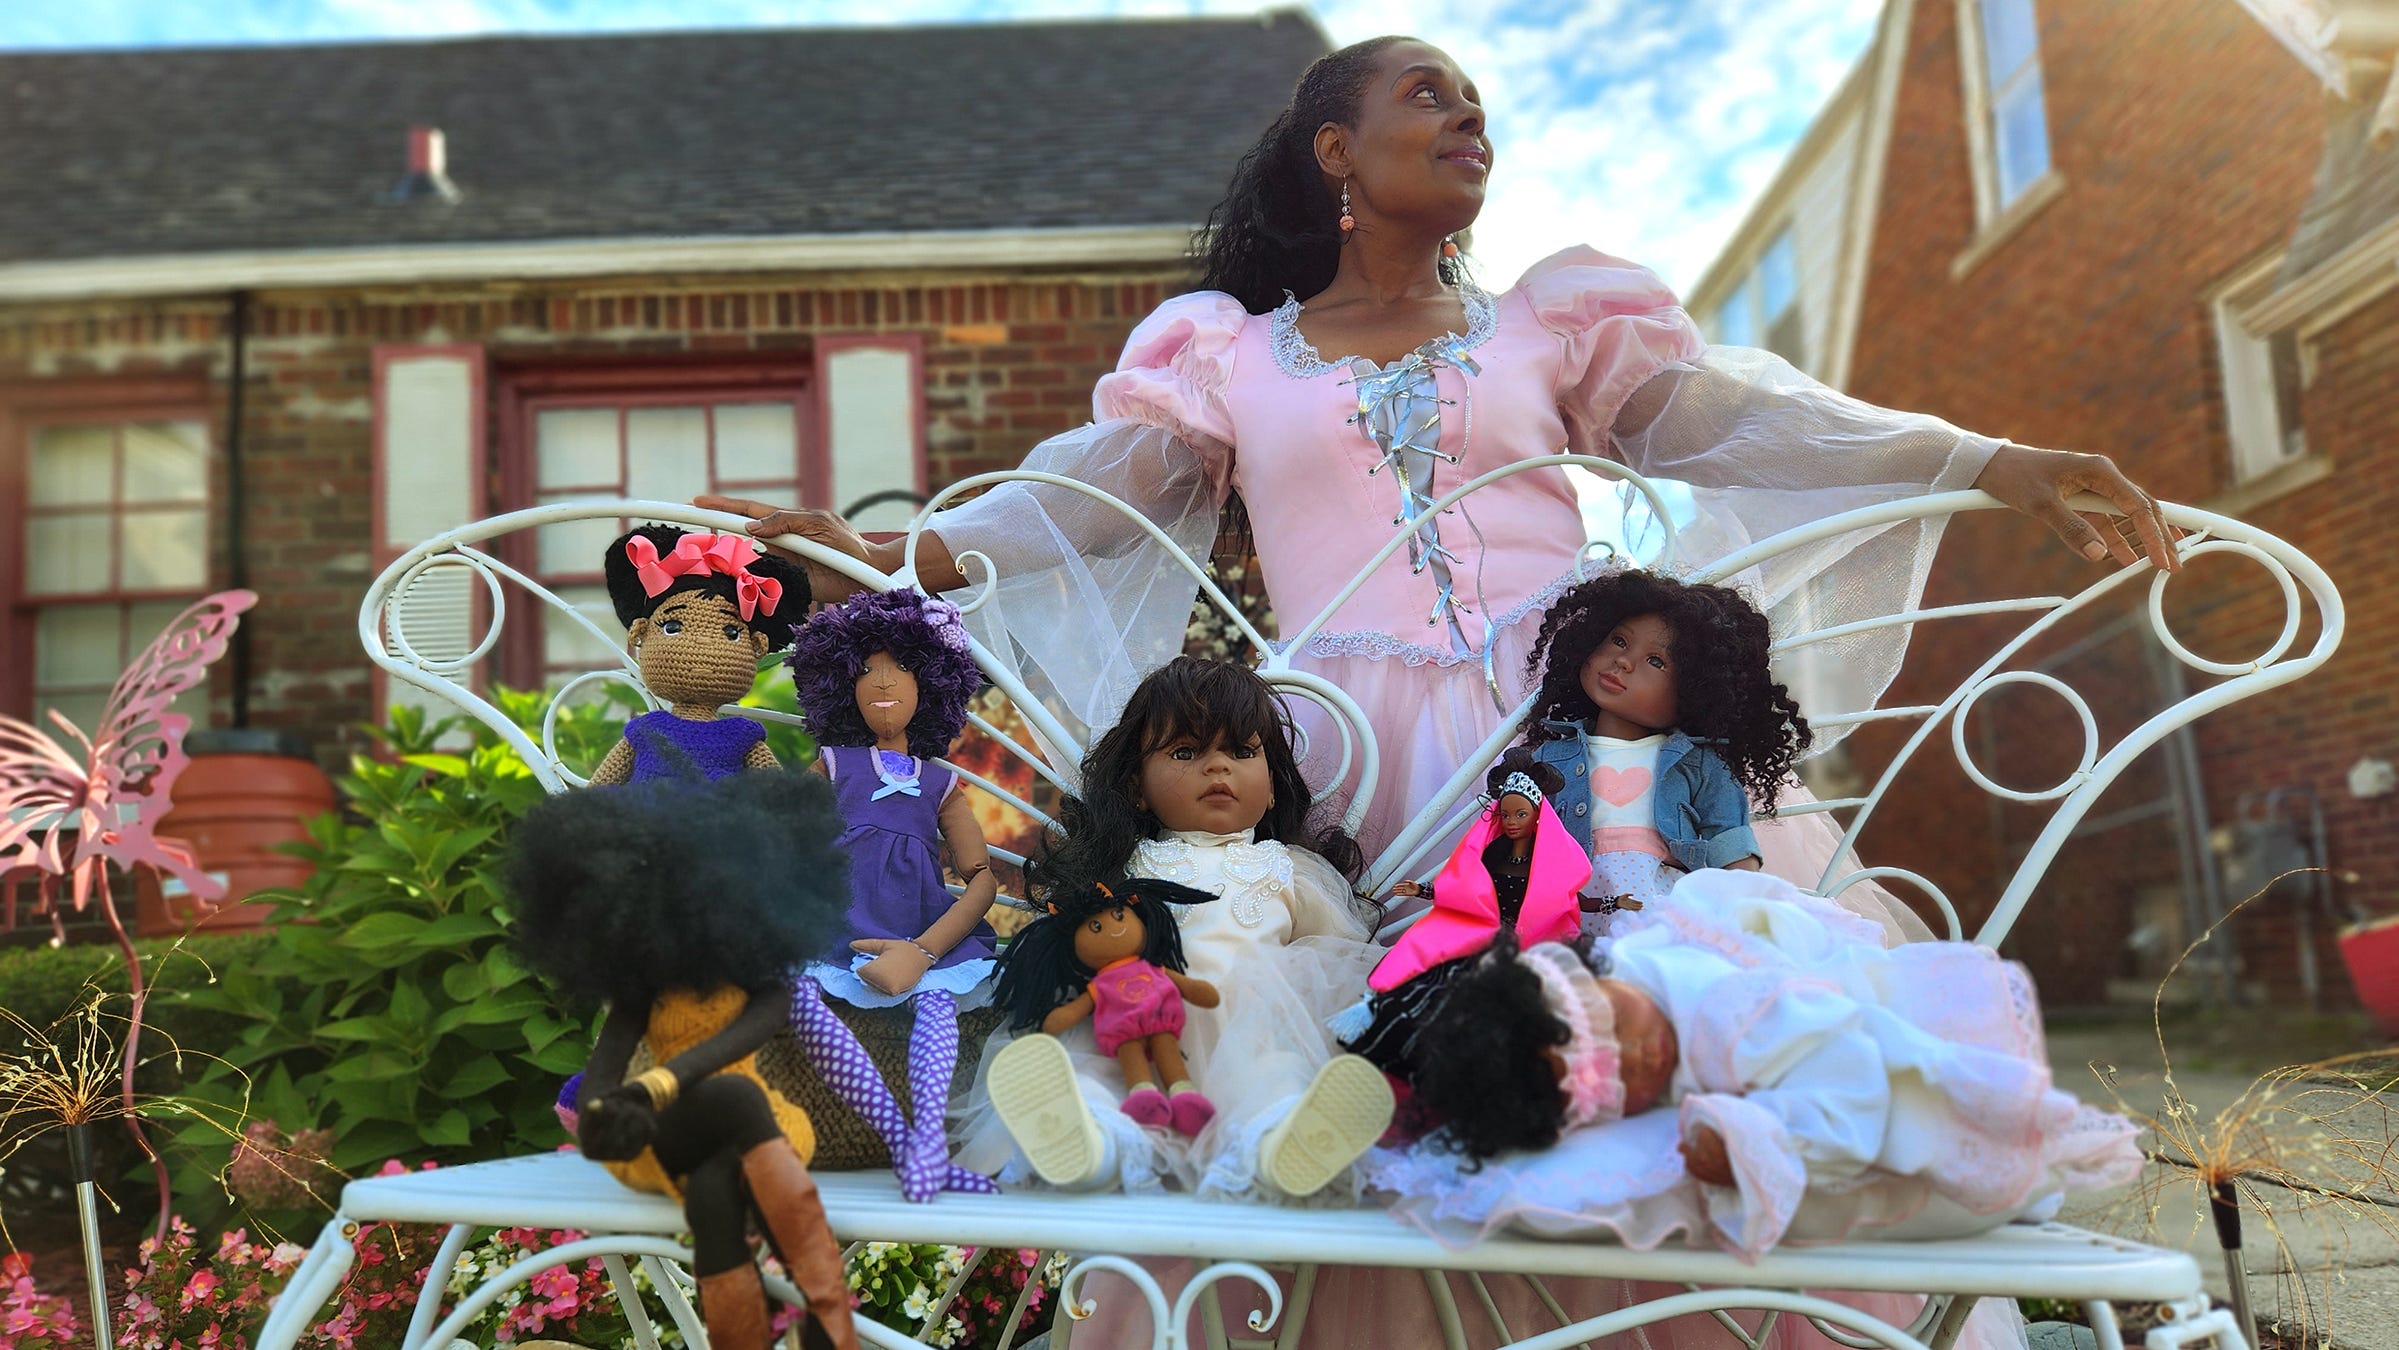 Detroit Doll Show returns at Marygrove Conservancy